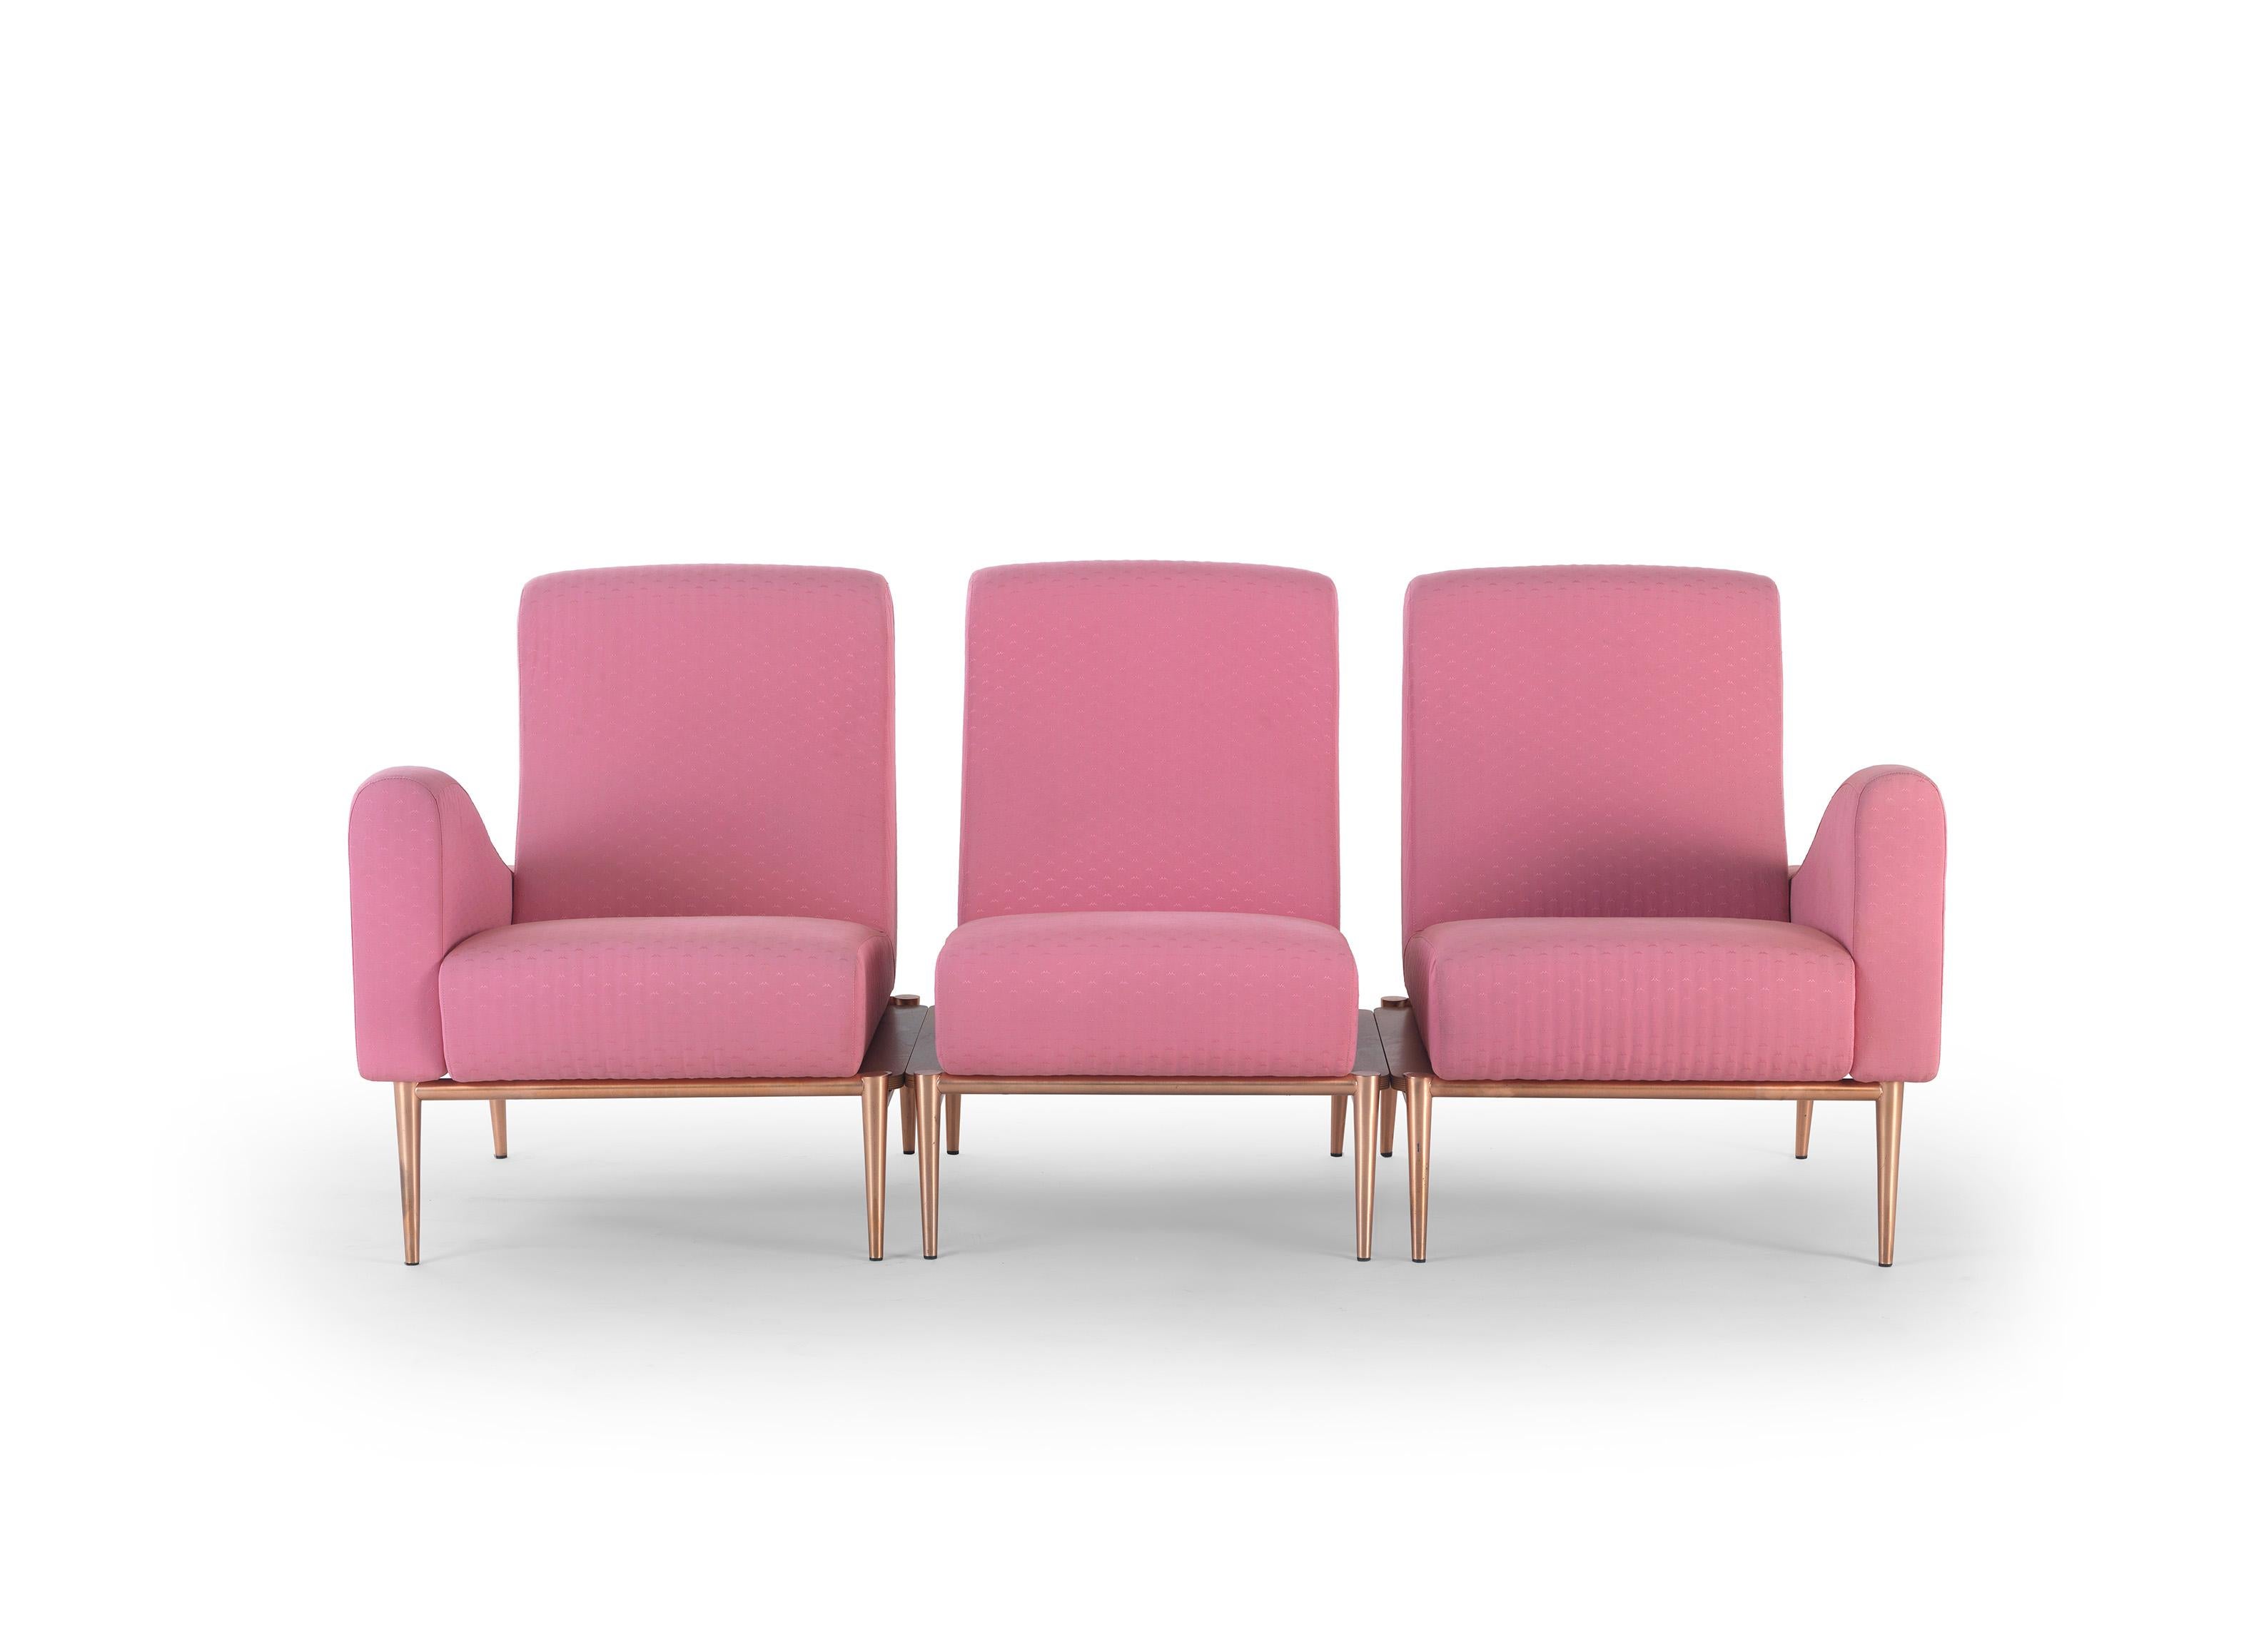 Breaking away from the linear pattern, yet simultaneously serving as a connector, Flabello takes center stage in the room for the creation of highly original and dynamic living zones. It's an upholstered armchair equipped with a concealed